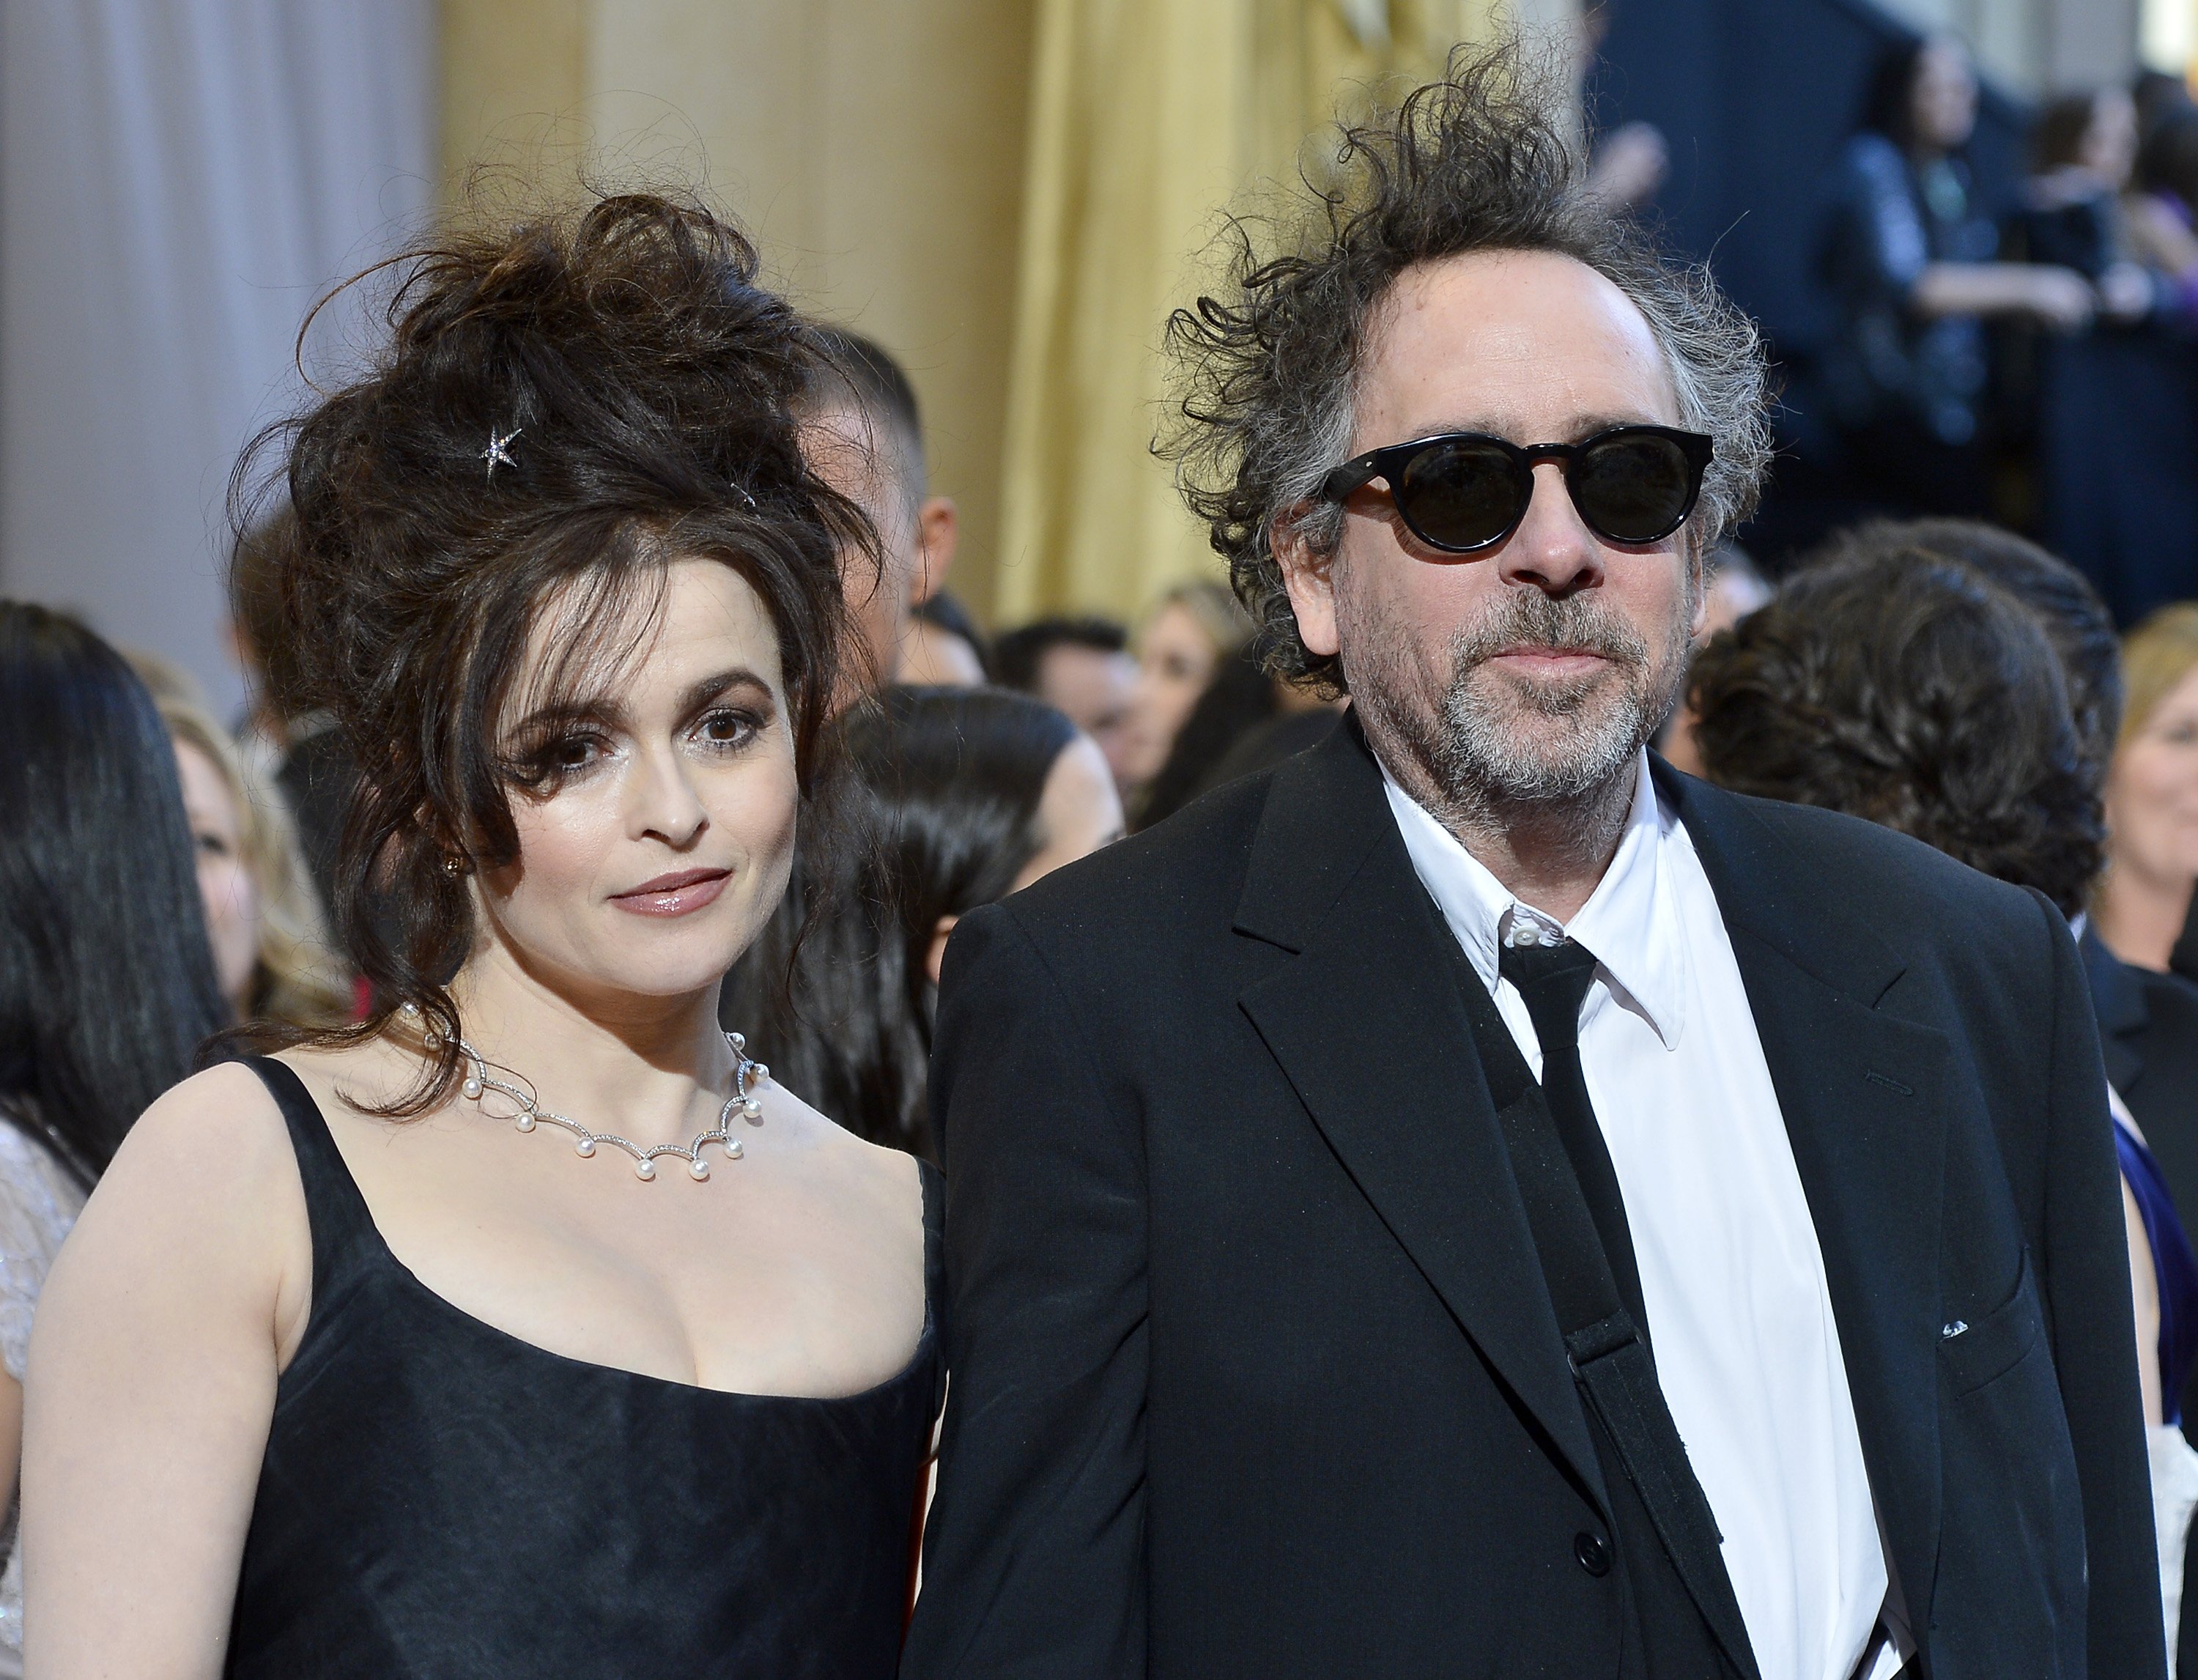 Helena Bonham Carter and director Tim Burton arrive at the Oscars at Hollywood & Highland Center on February 24, 2013 in Hollywood, California. | Source: Getty Images